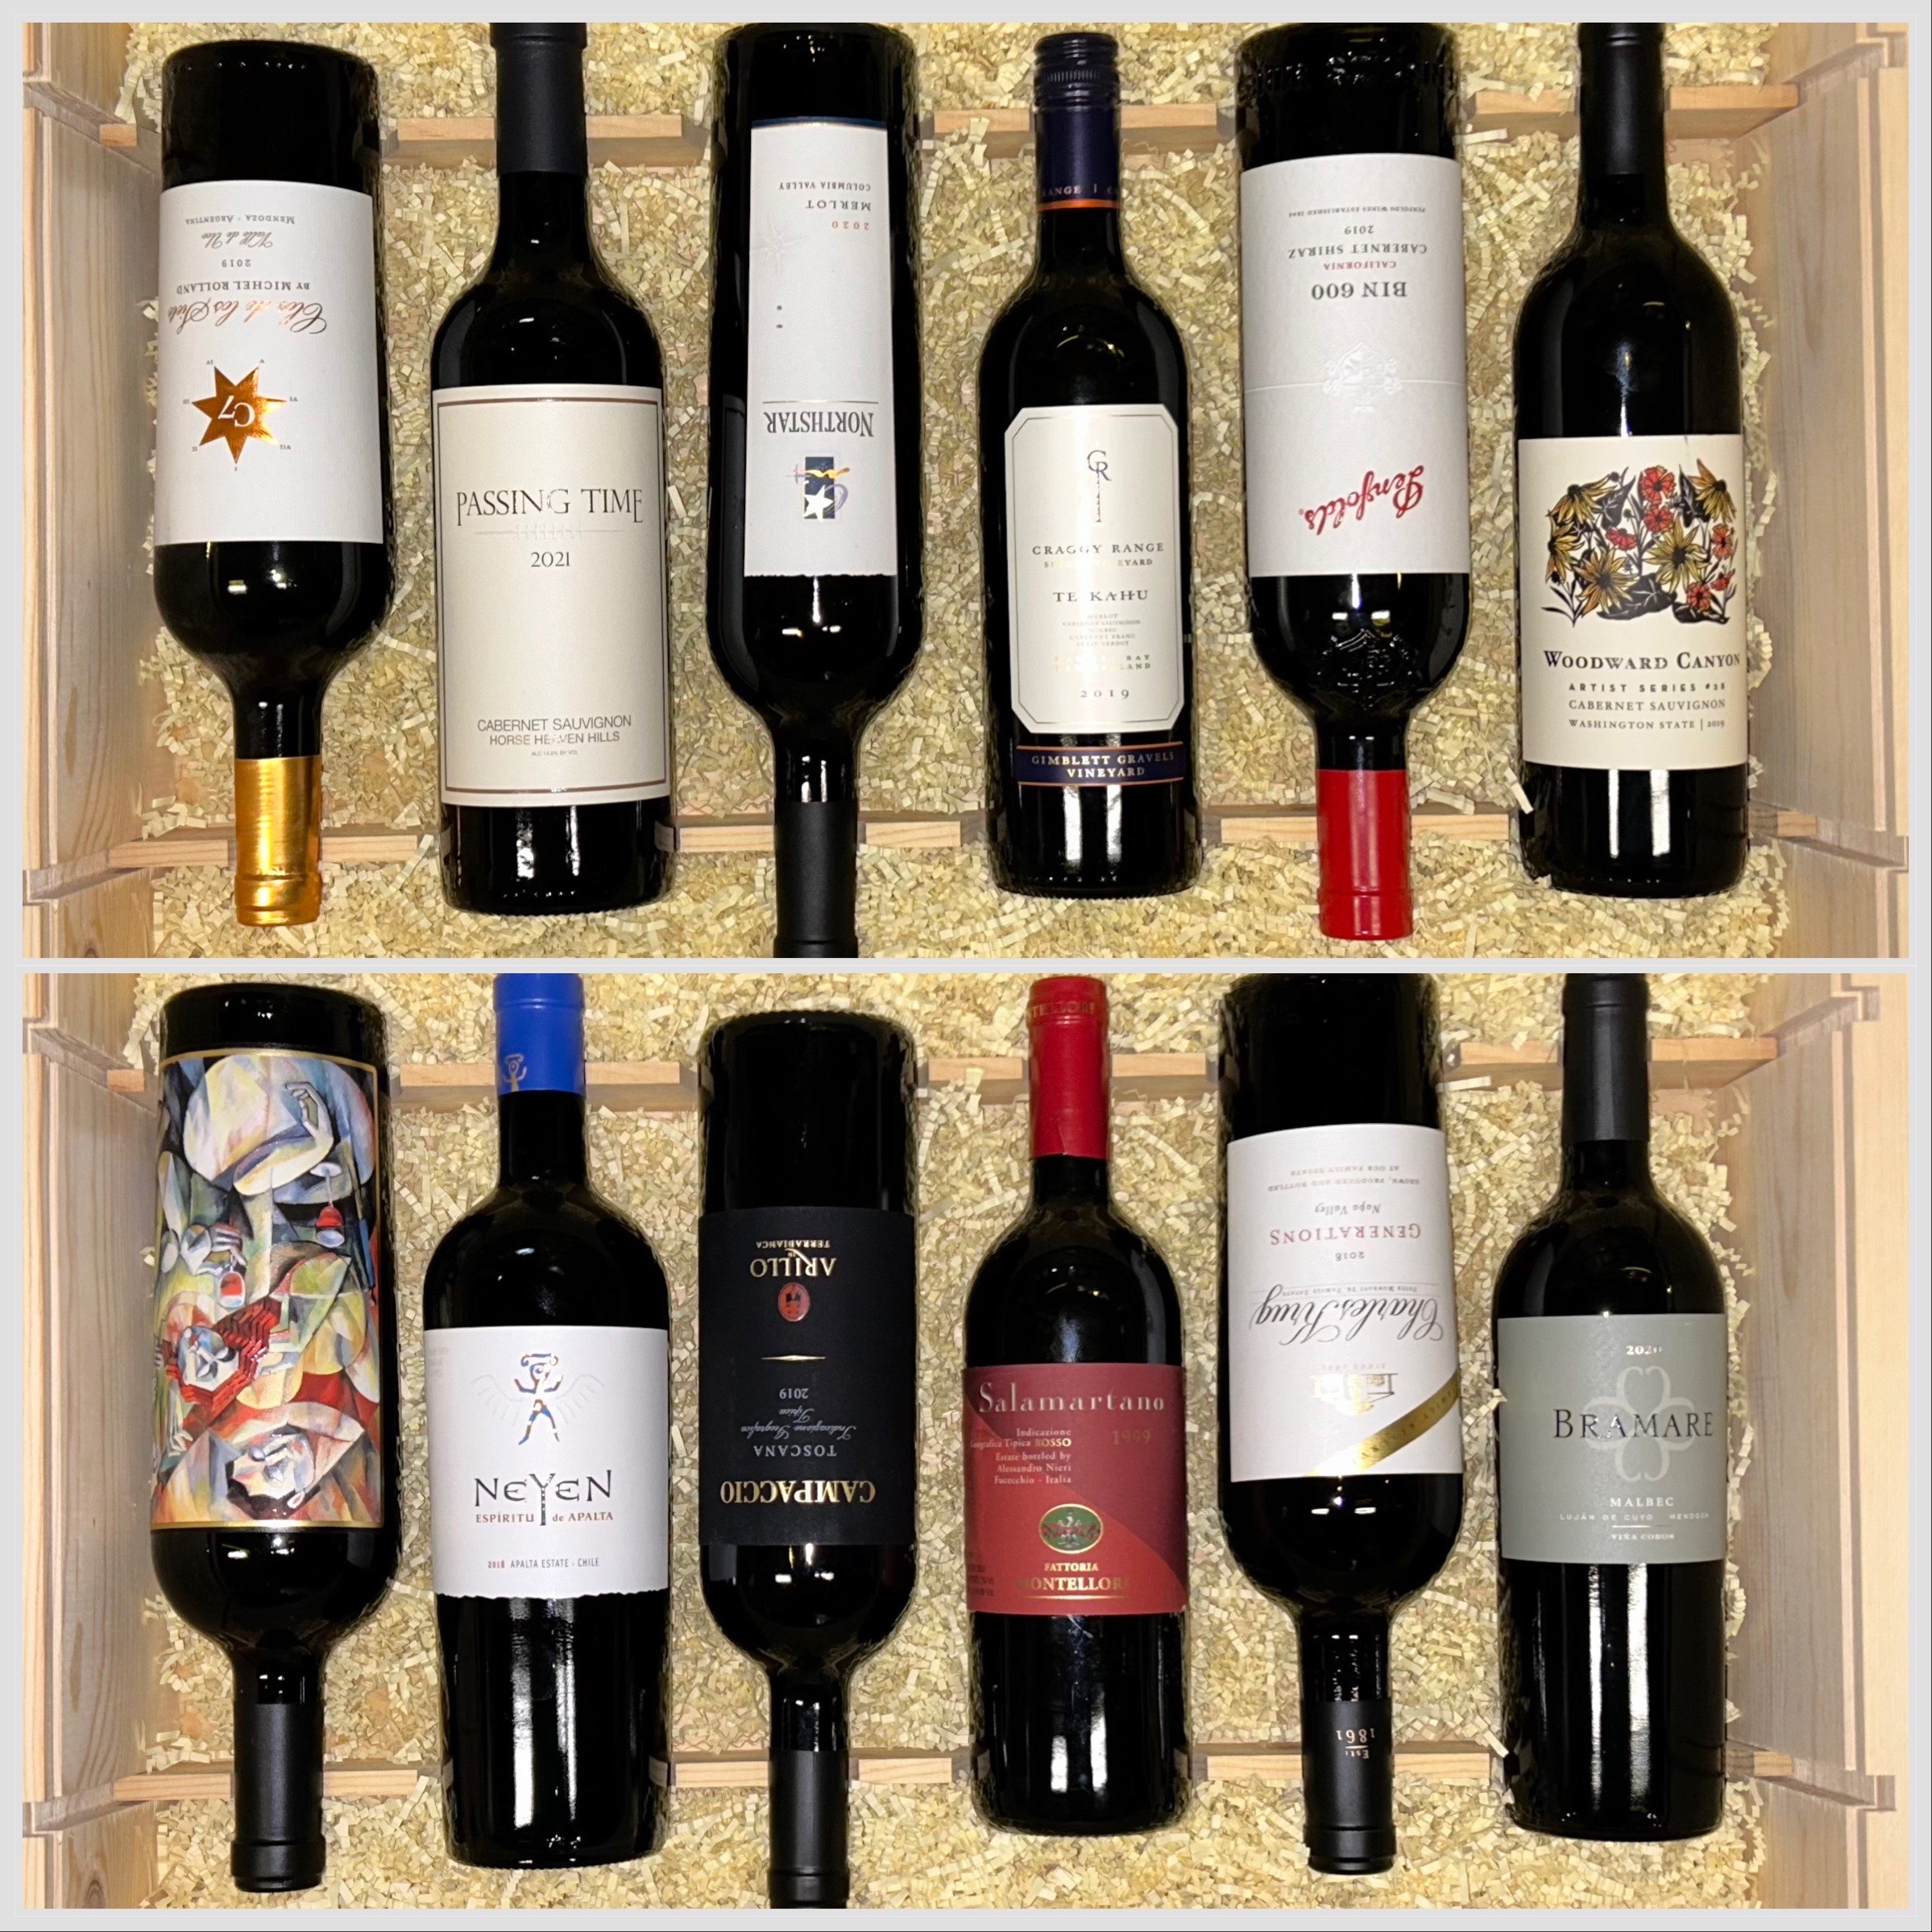 Bordeaux Blends from around the world 12 Bottle Case #23A4 - click for full details